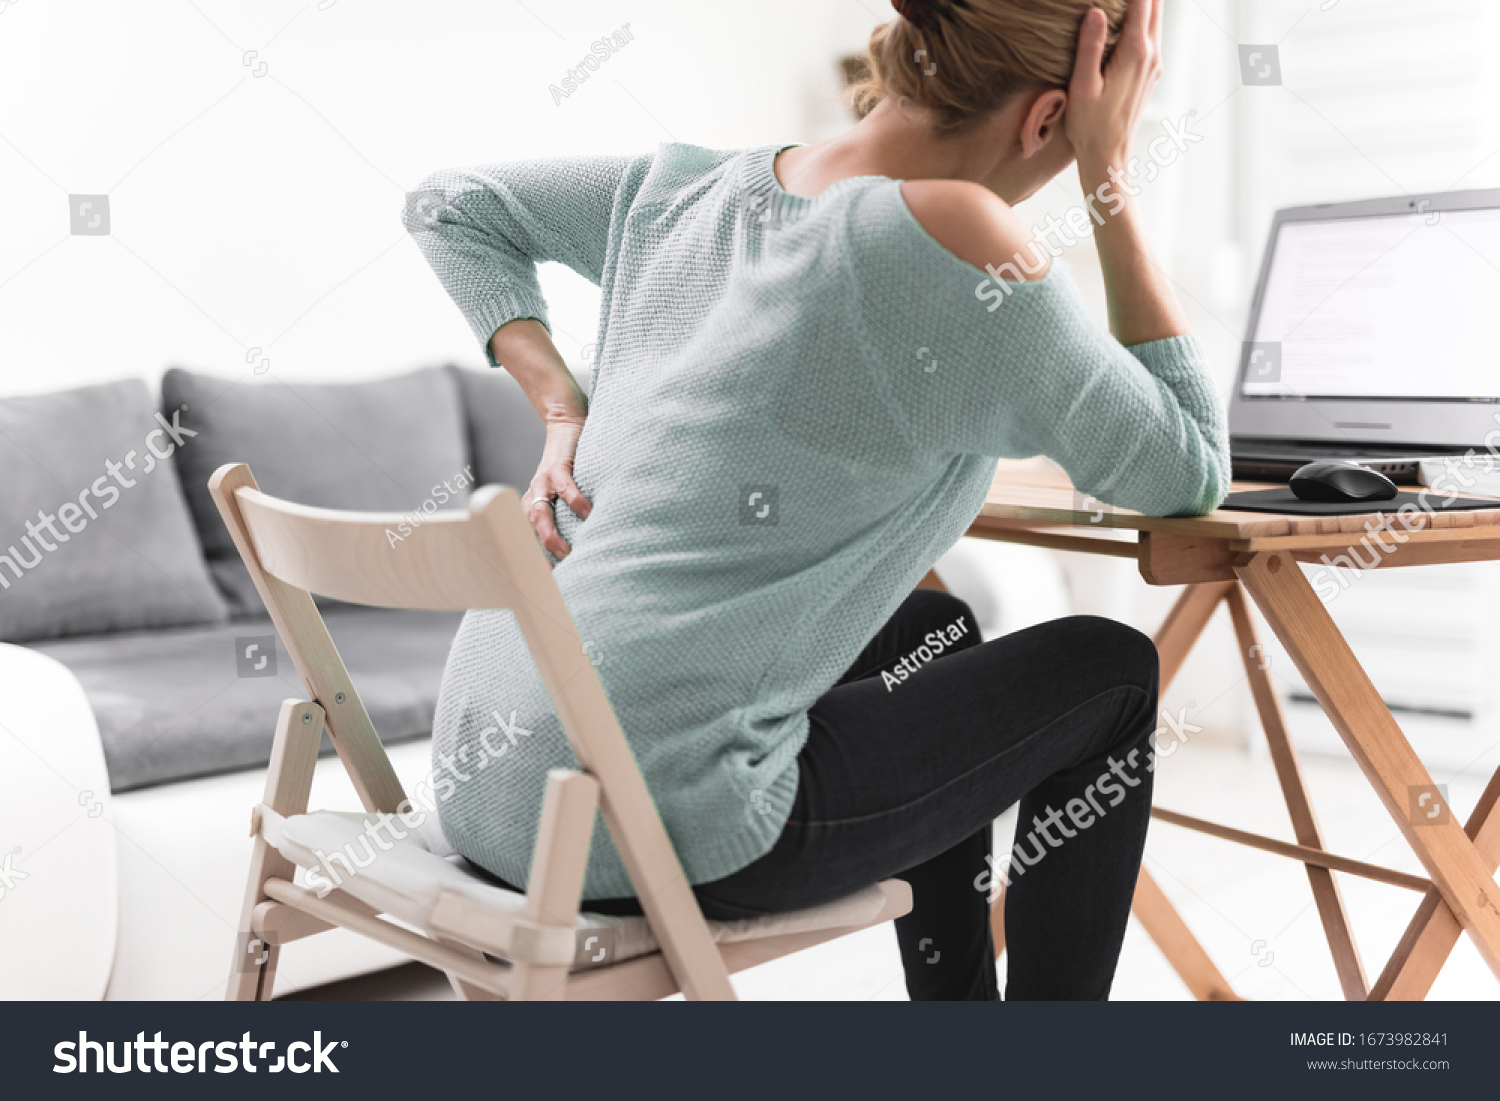 Woman working on a laptop and having headache and back, hip, spine pain. #1673982841